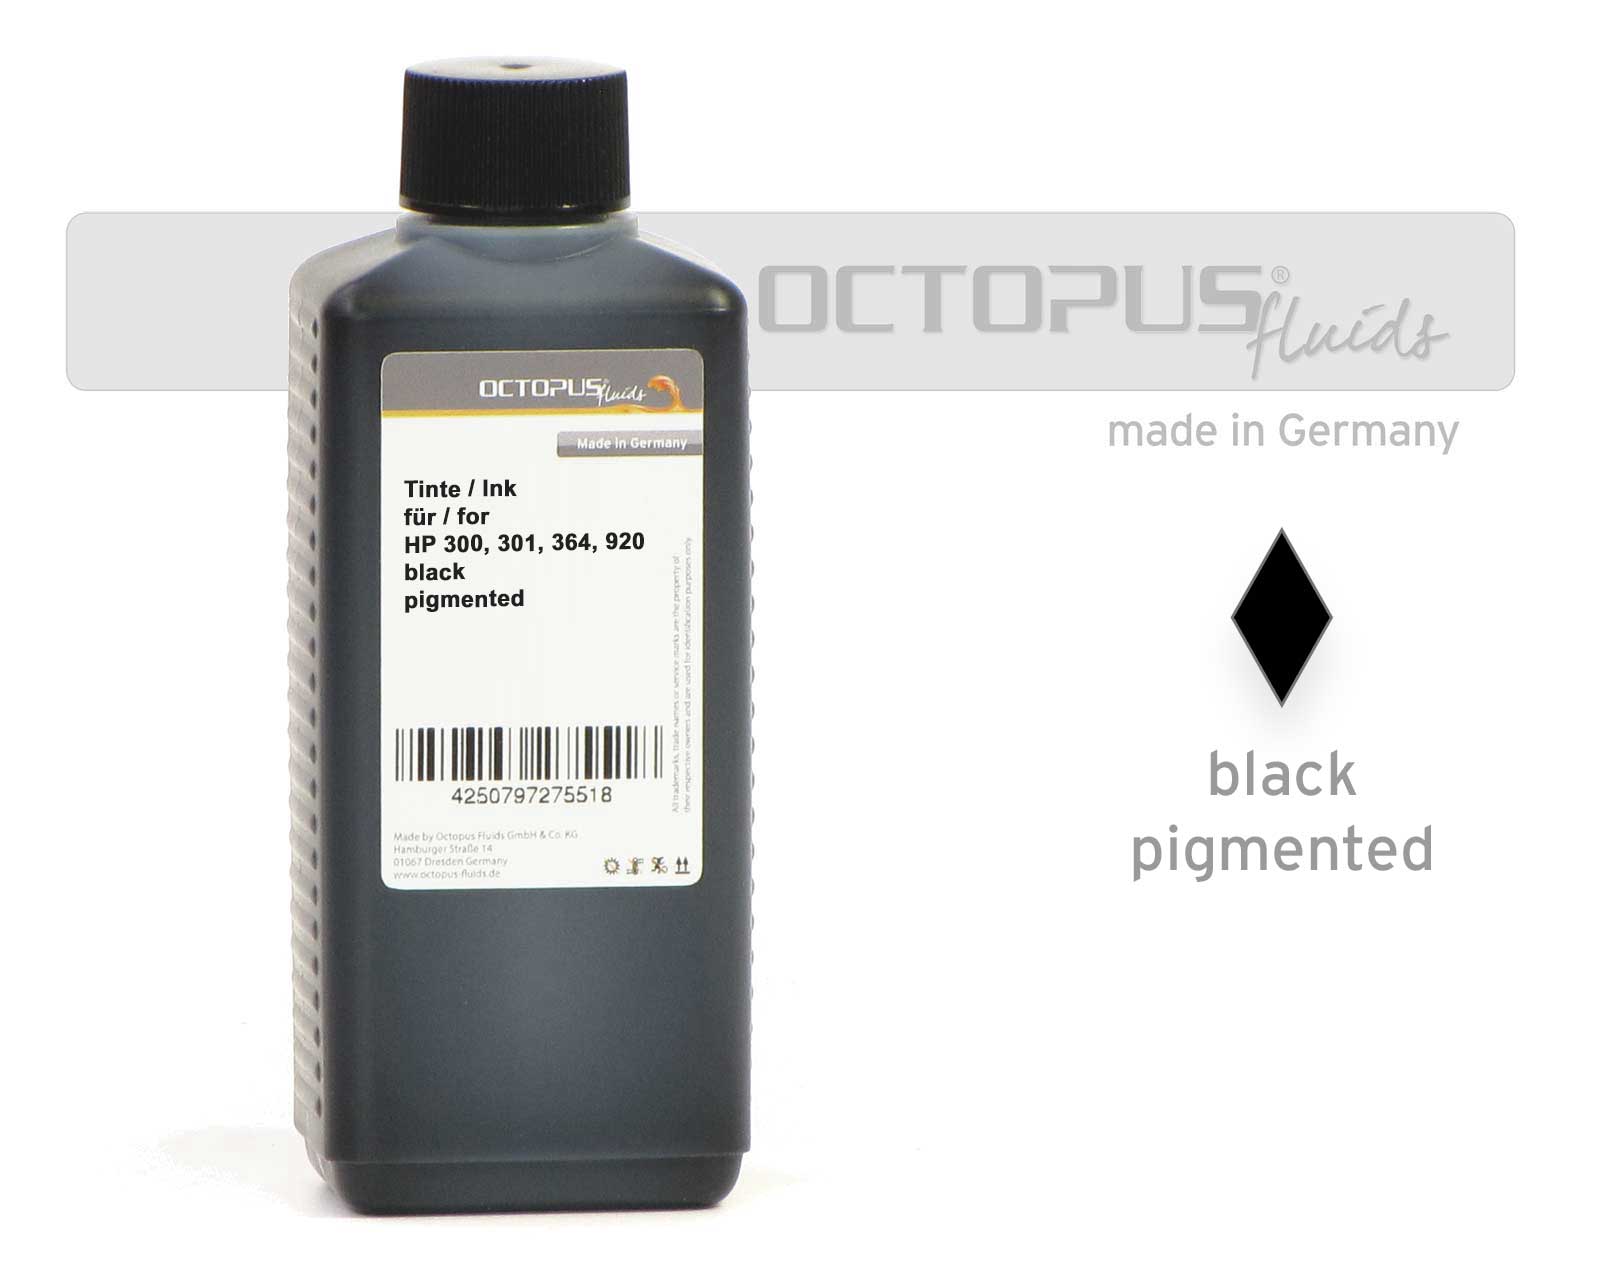 Octopus Refill Ink for HP 300, HP 301, HP 364, HP 920 pigmented black